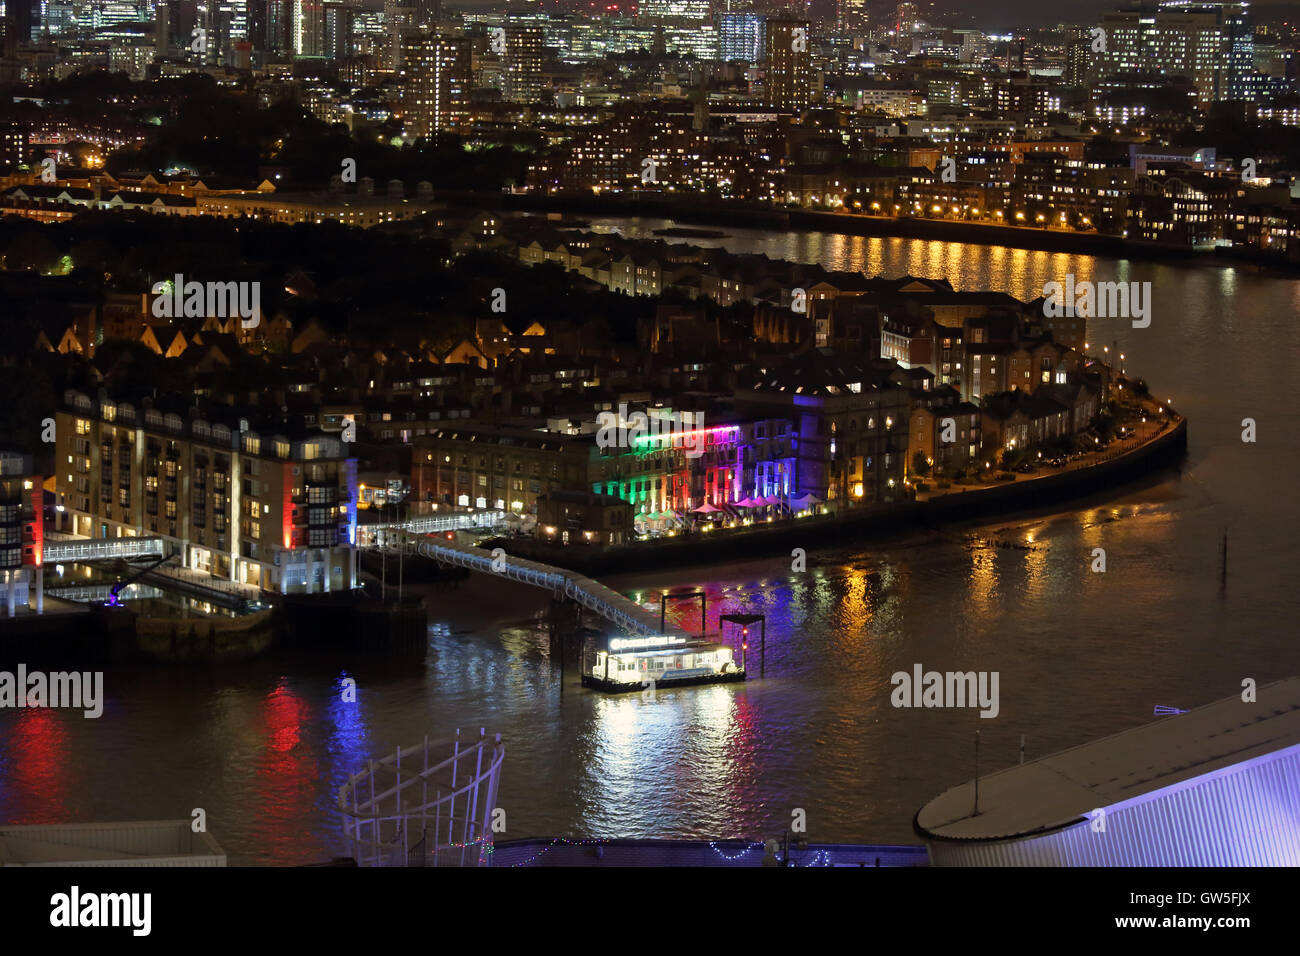 Night view of Nelson Dock Pier, Columbia Wharf and the River Thames from Marsh Wall, Canary Wharf, London, UK, E14 Stock Photo